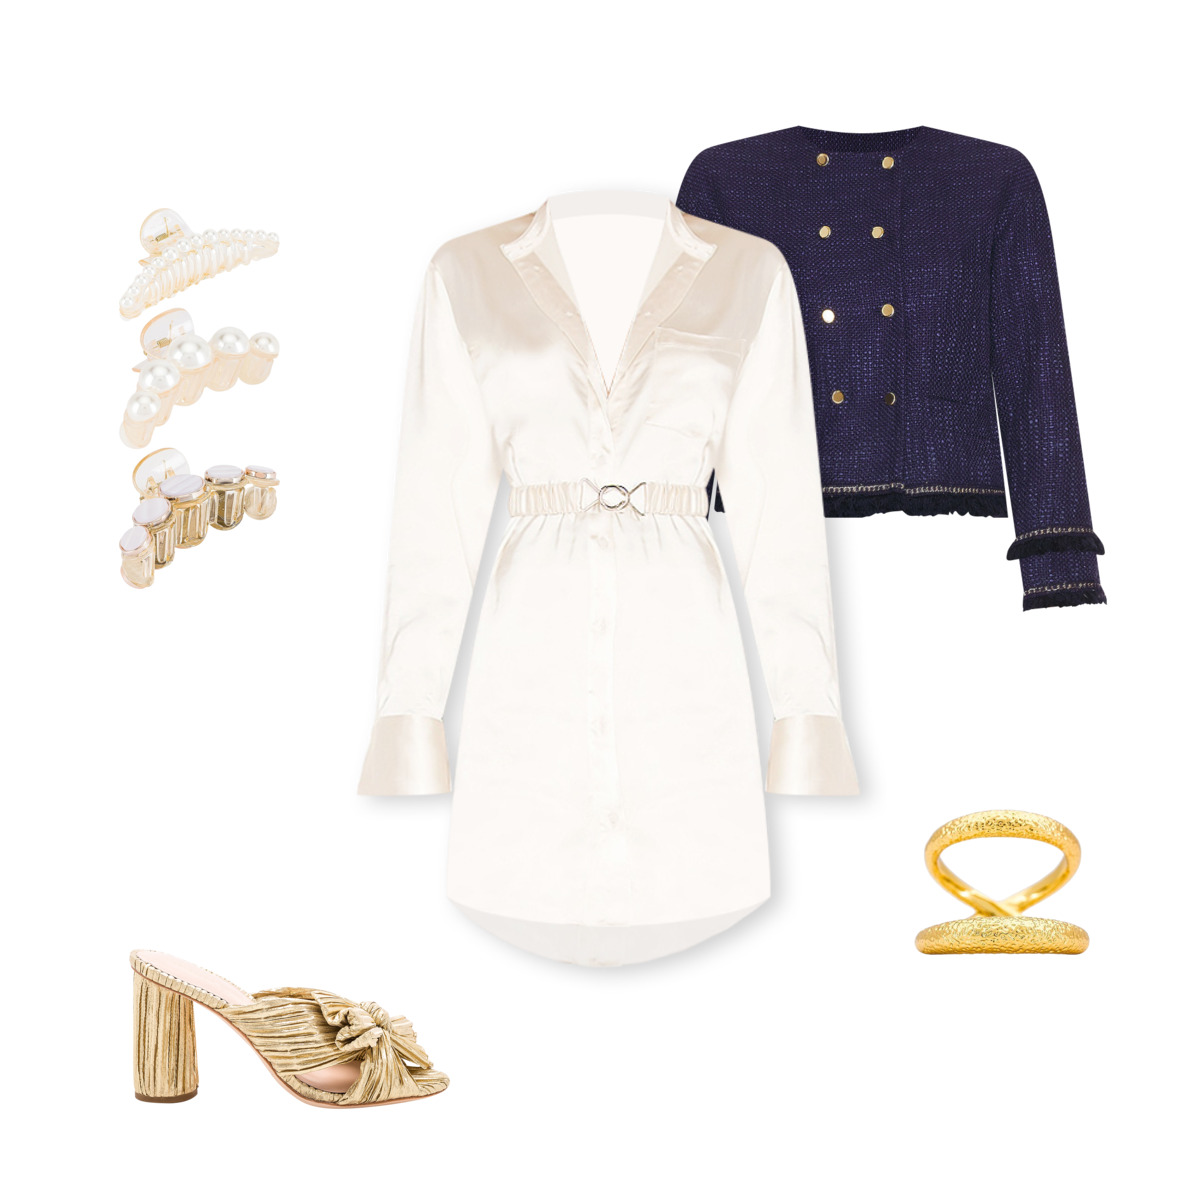 Revolve outfit featuring white satin shirt dress, navy blue tweed double breasted blazer with fringe at the cuffs and hem, gold heeled sandals, gold ring, and pearl hair clips. Outfit created by Stylitics software for Shoptalk style guide. 